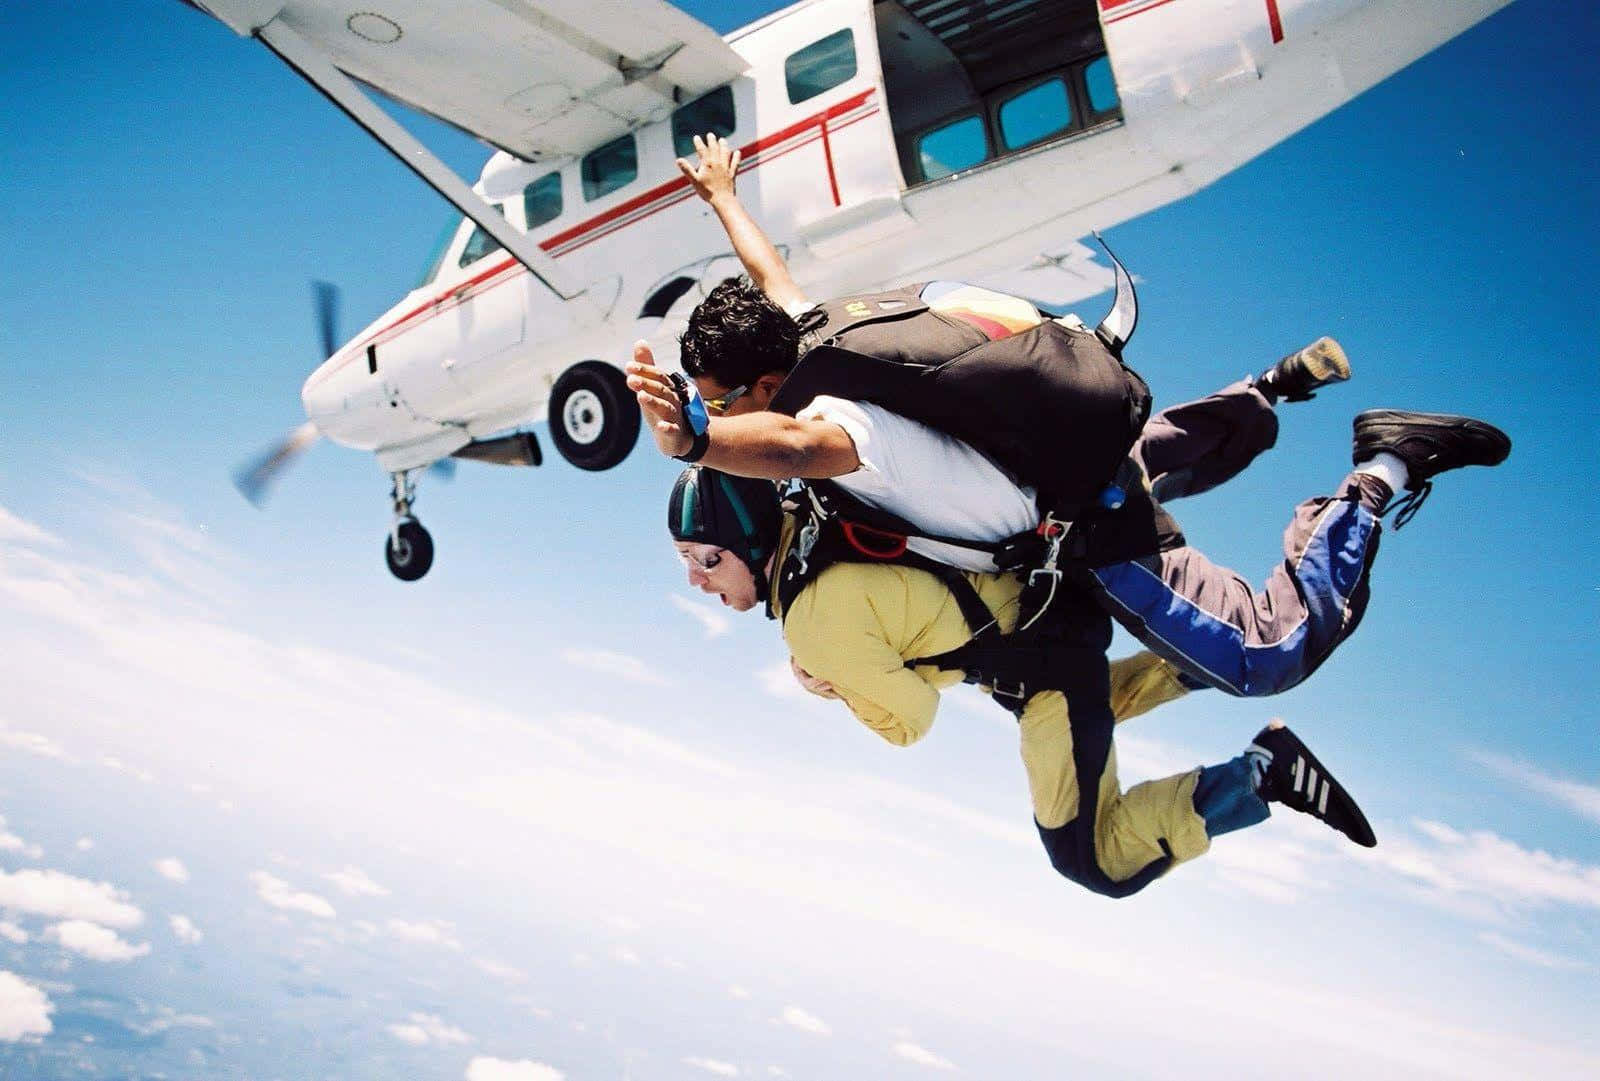 A Man And Woman Are Jumping From A Plane